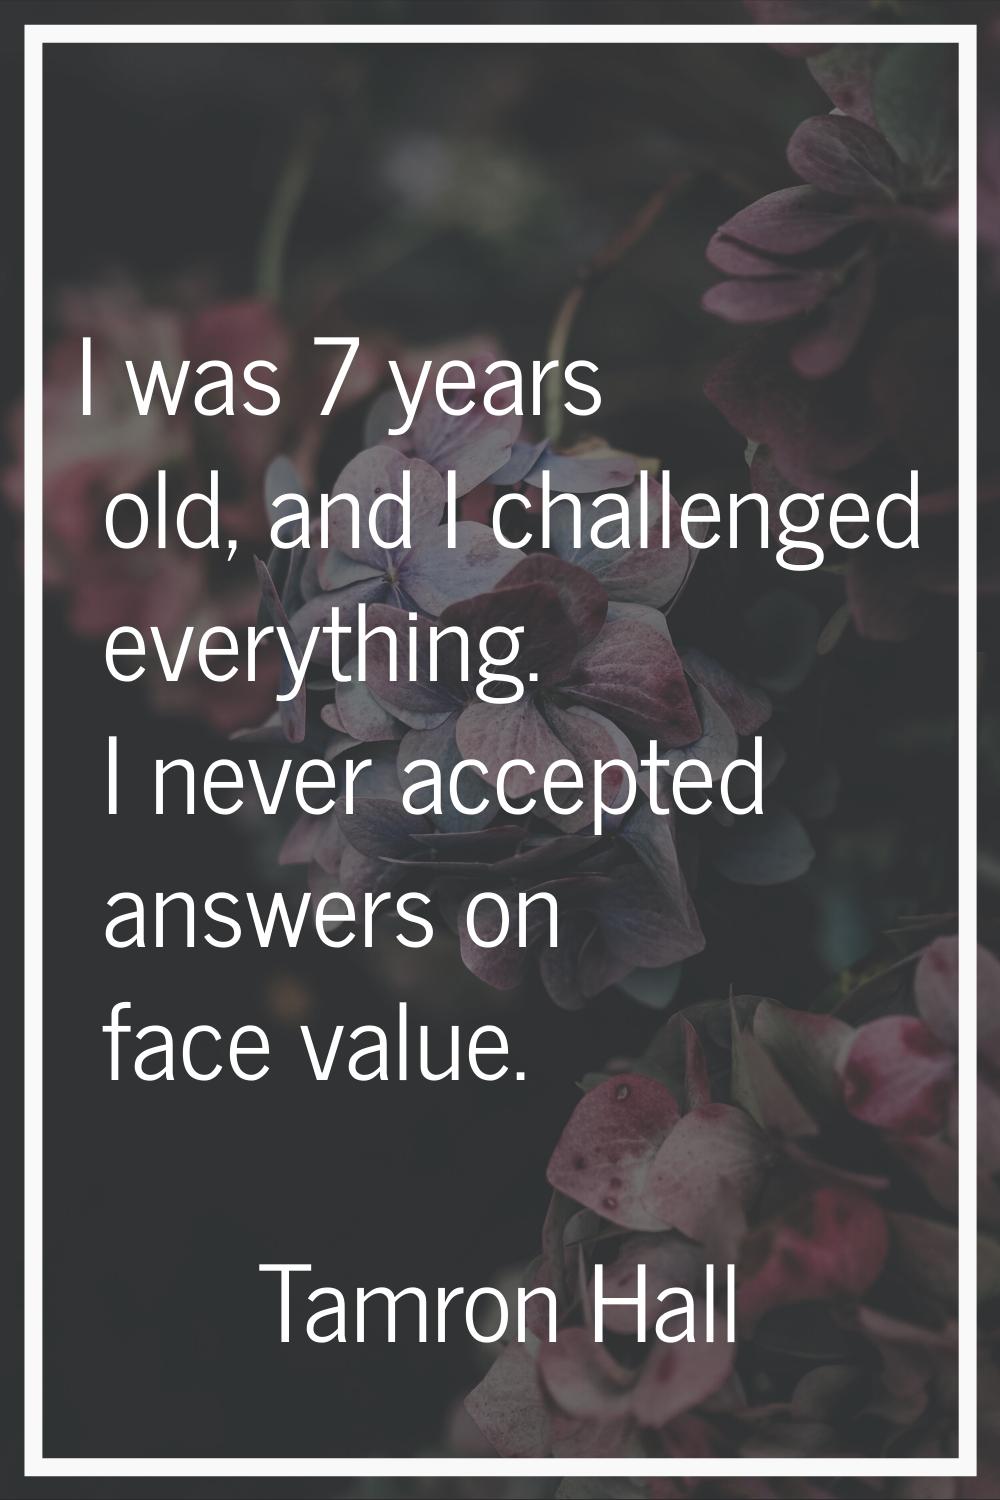 I was 7 years old, and I challenged everything. I never accepted answers on face value.